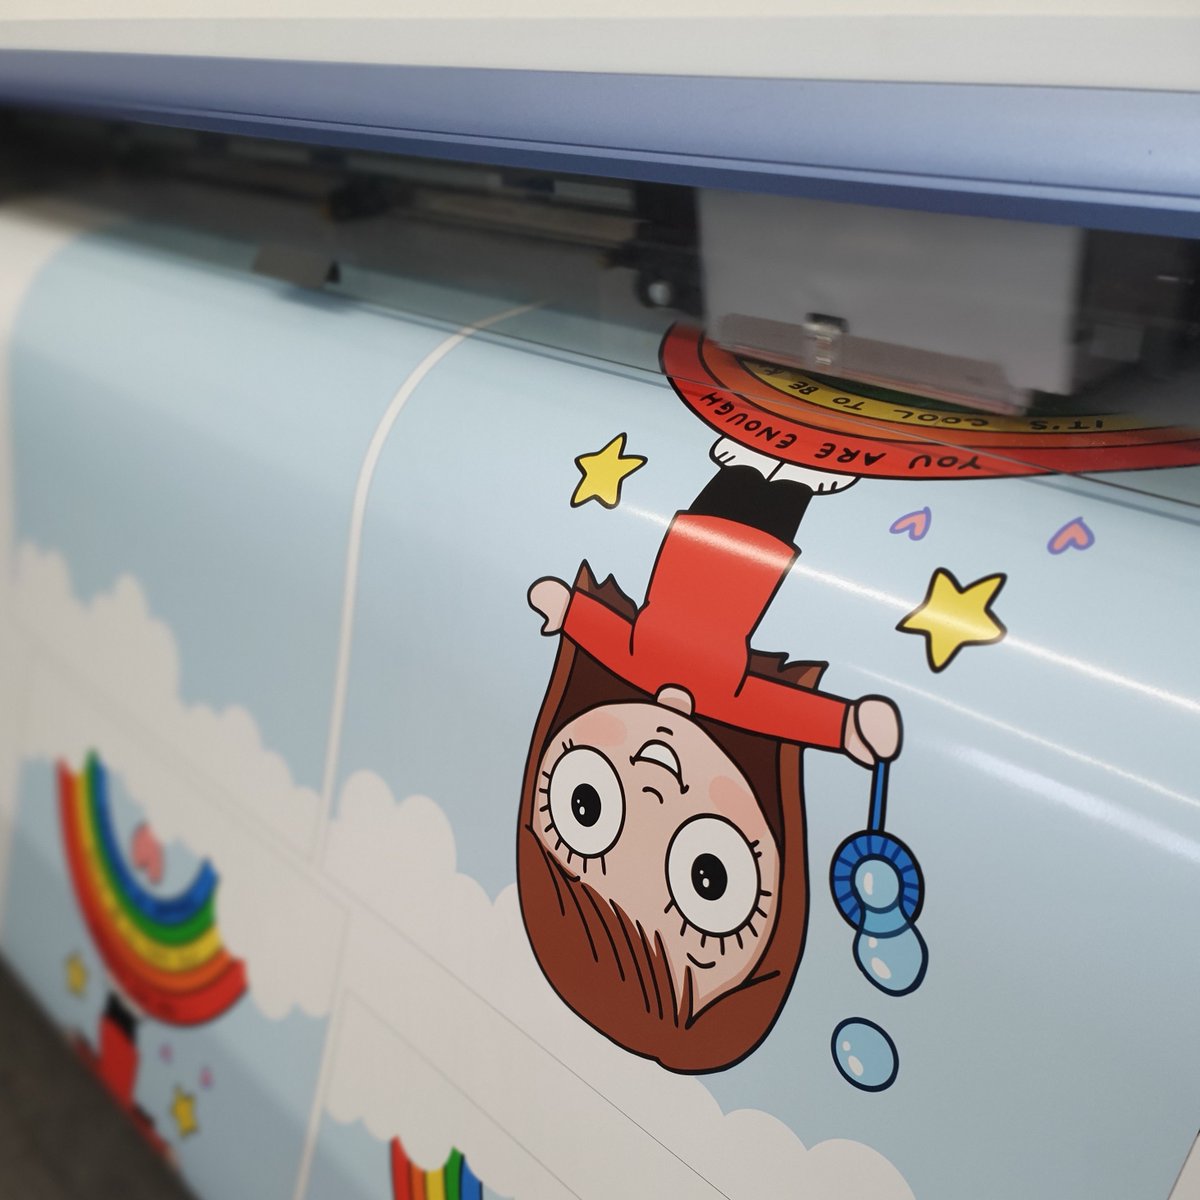 Our printer has been keeping busy with some colourful window graphics for #ChildrensTherapyServices.

#RCGraphixLtd #WindowGraphics #WindowManifestations #PrivacyFilm #Branding #Workspace #WorkplaceBranding #MadeInYorkshire #BarnsleyIsBrill #RotherhamIsWonderful